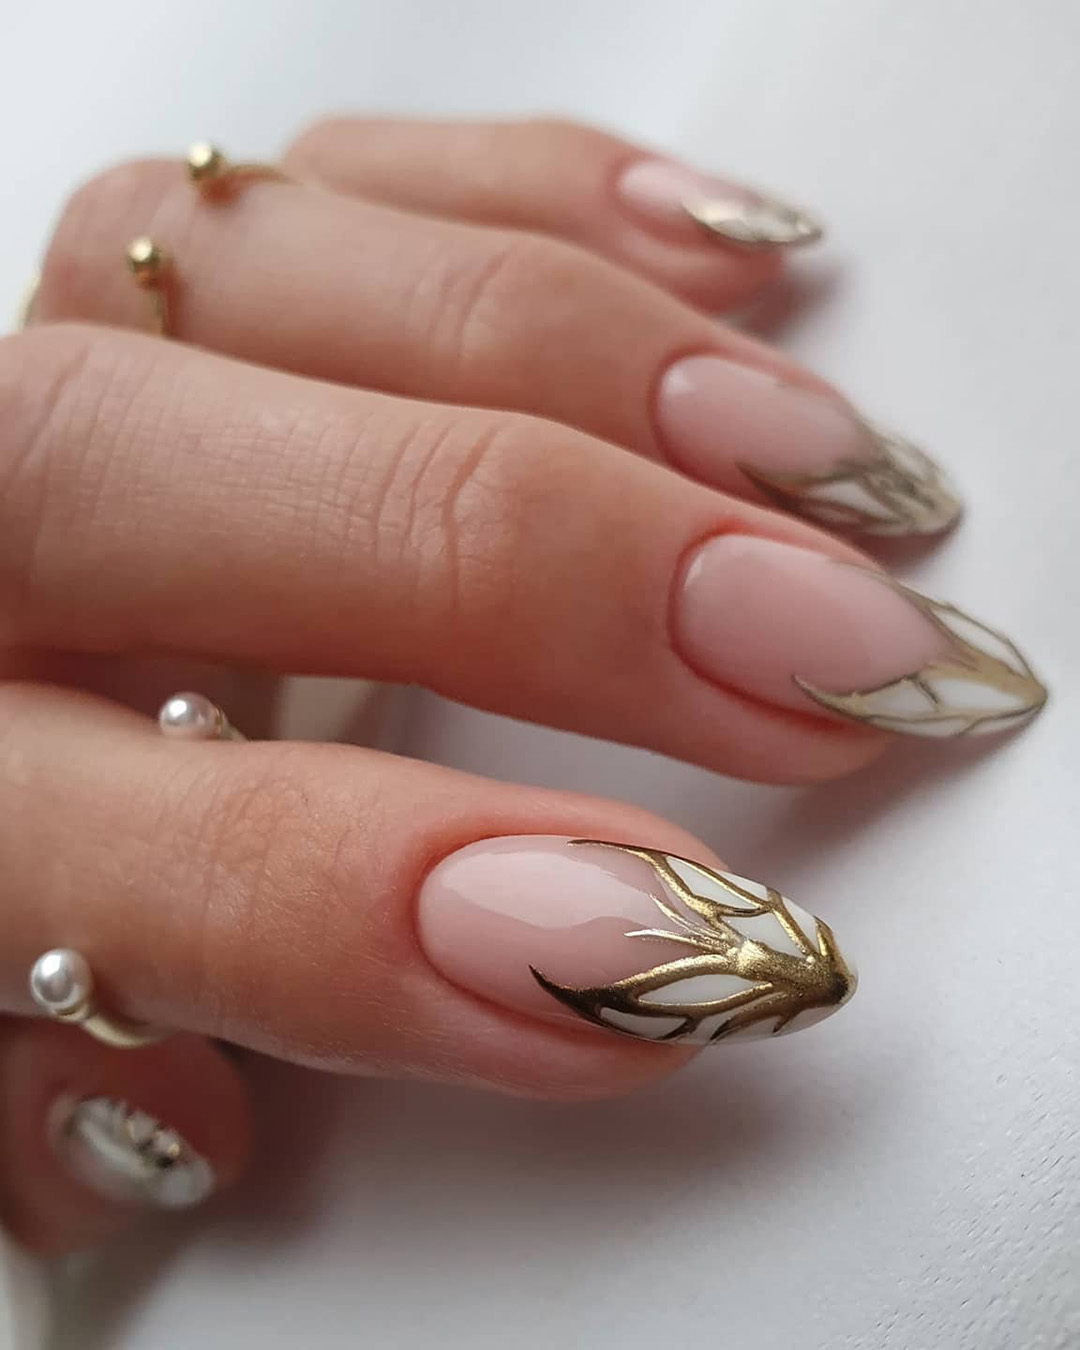 french wedding nails with white gold butterfly shape tips thehotblend